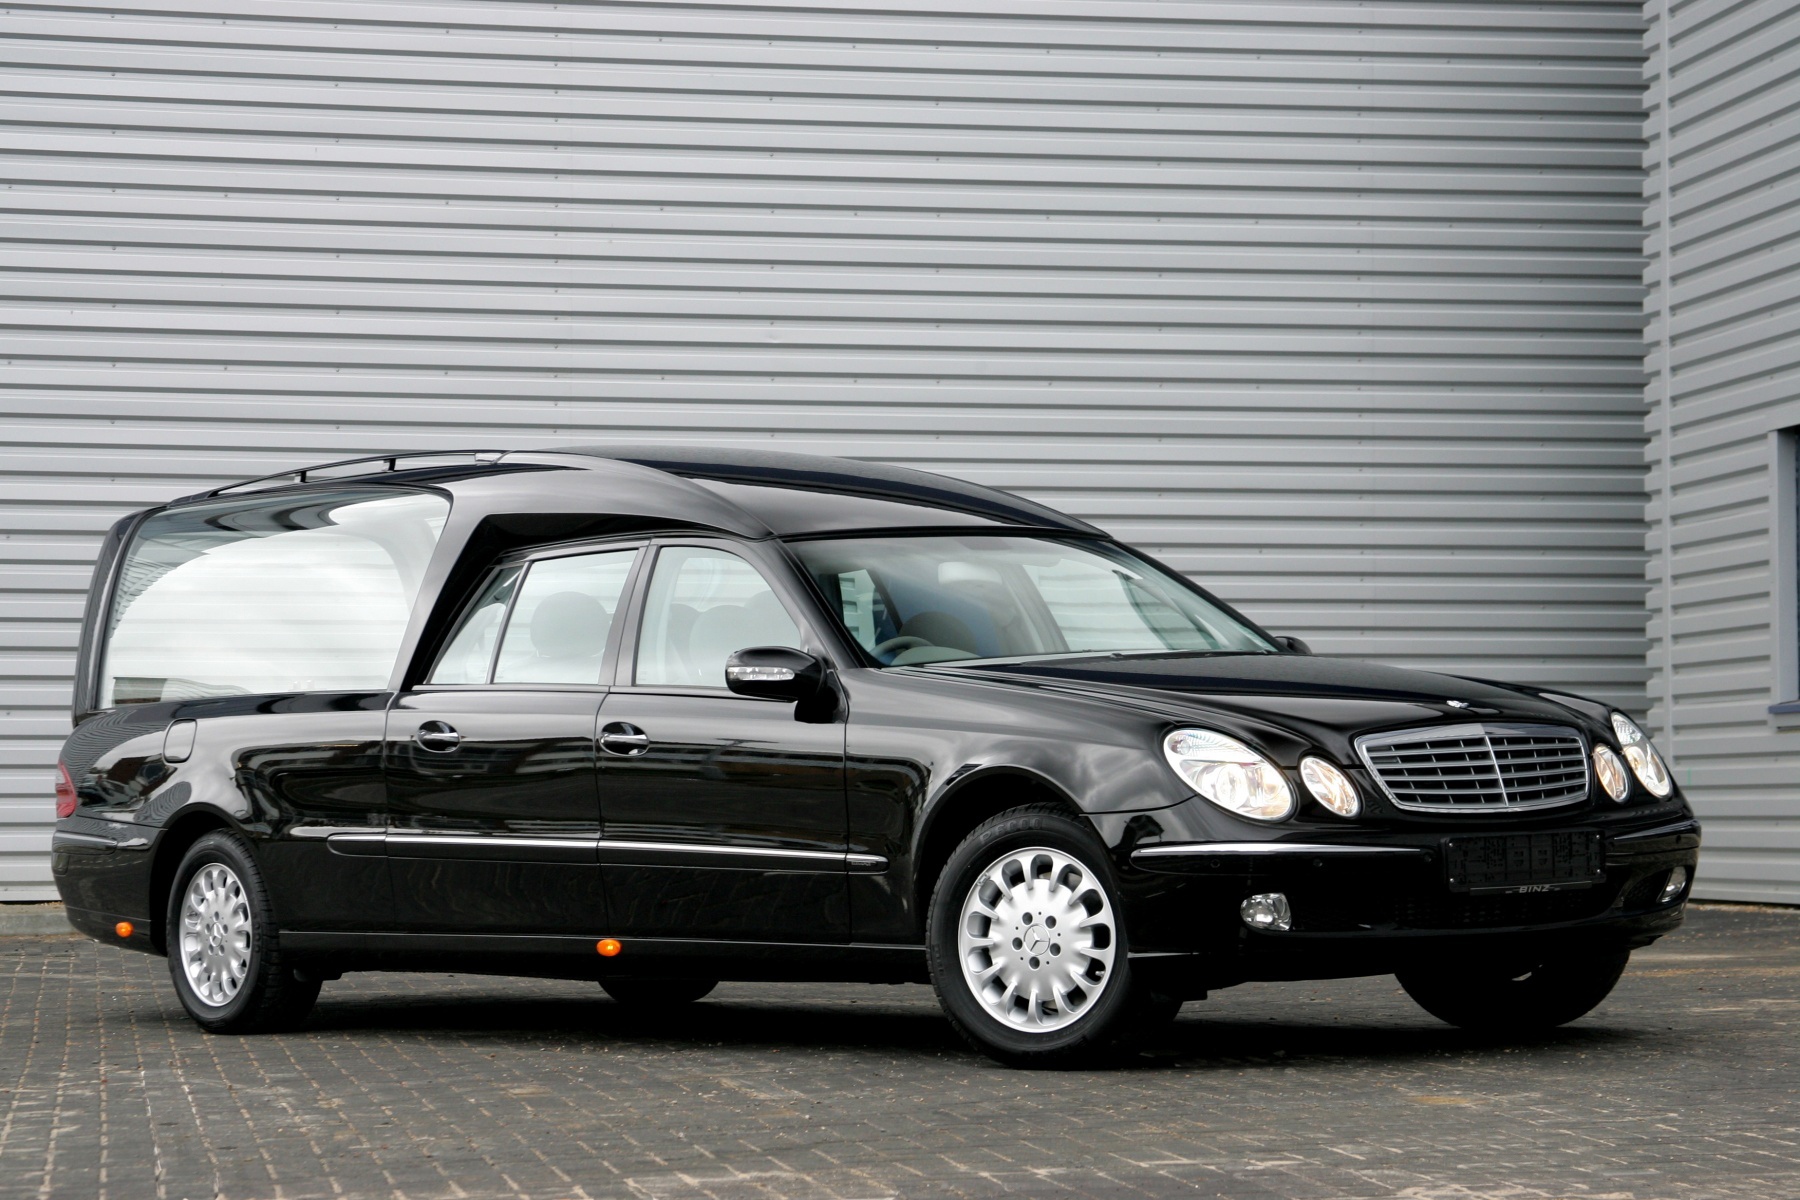 What might Japanese drivers hide when passing a hearse?